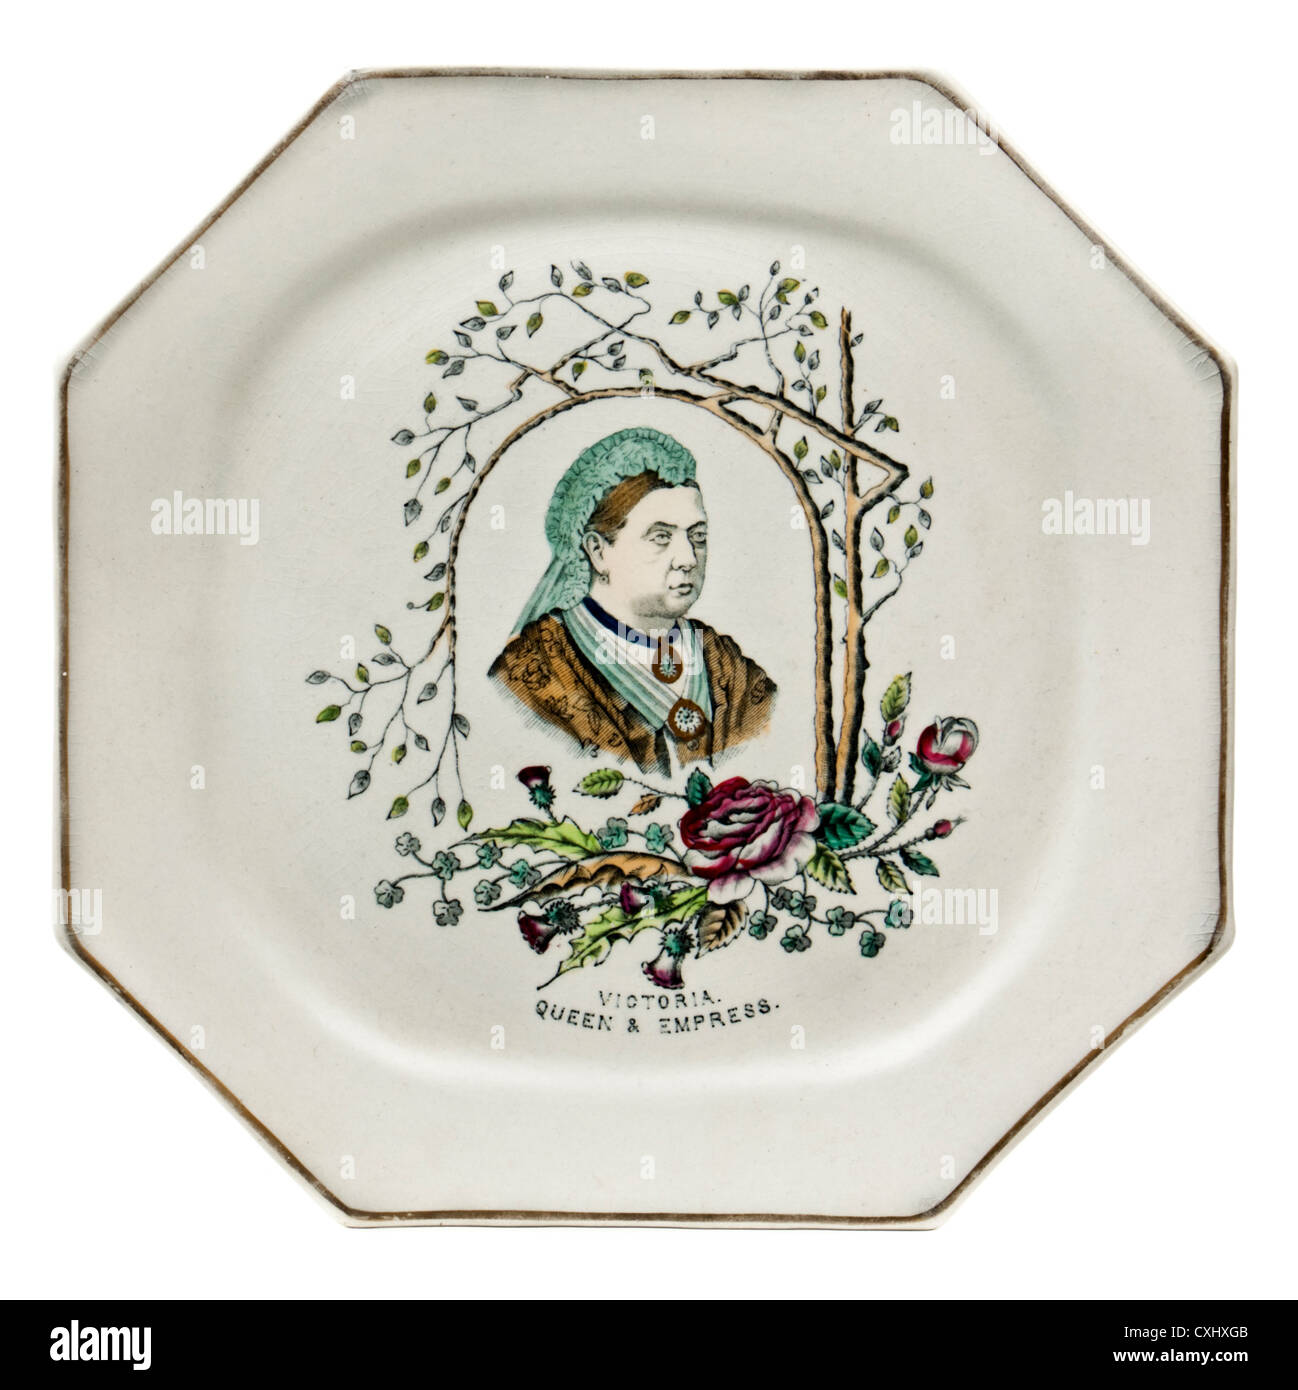 1876 antique 'Victoria, Queen & Empress' ironstone plate, commemorating Queen Victoria assuming the title 'Empress of India' Stock Photo